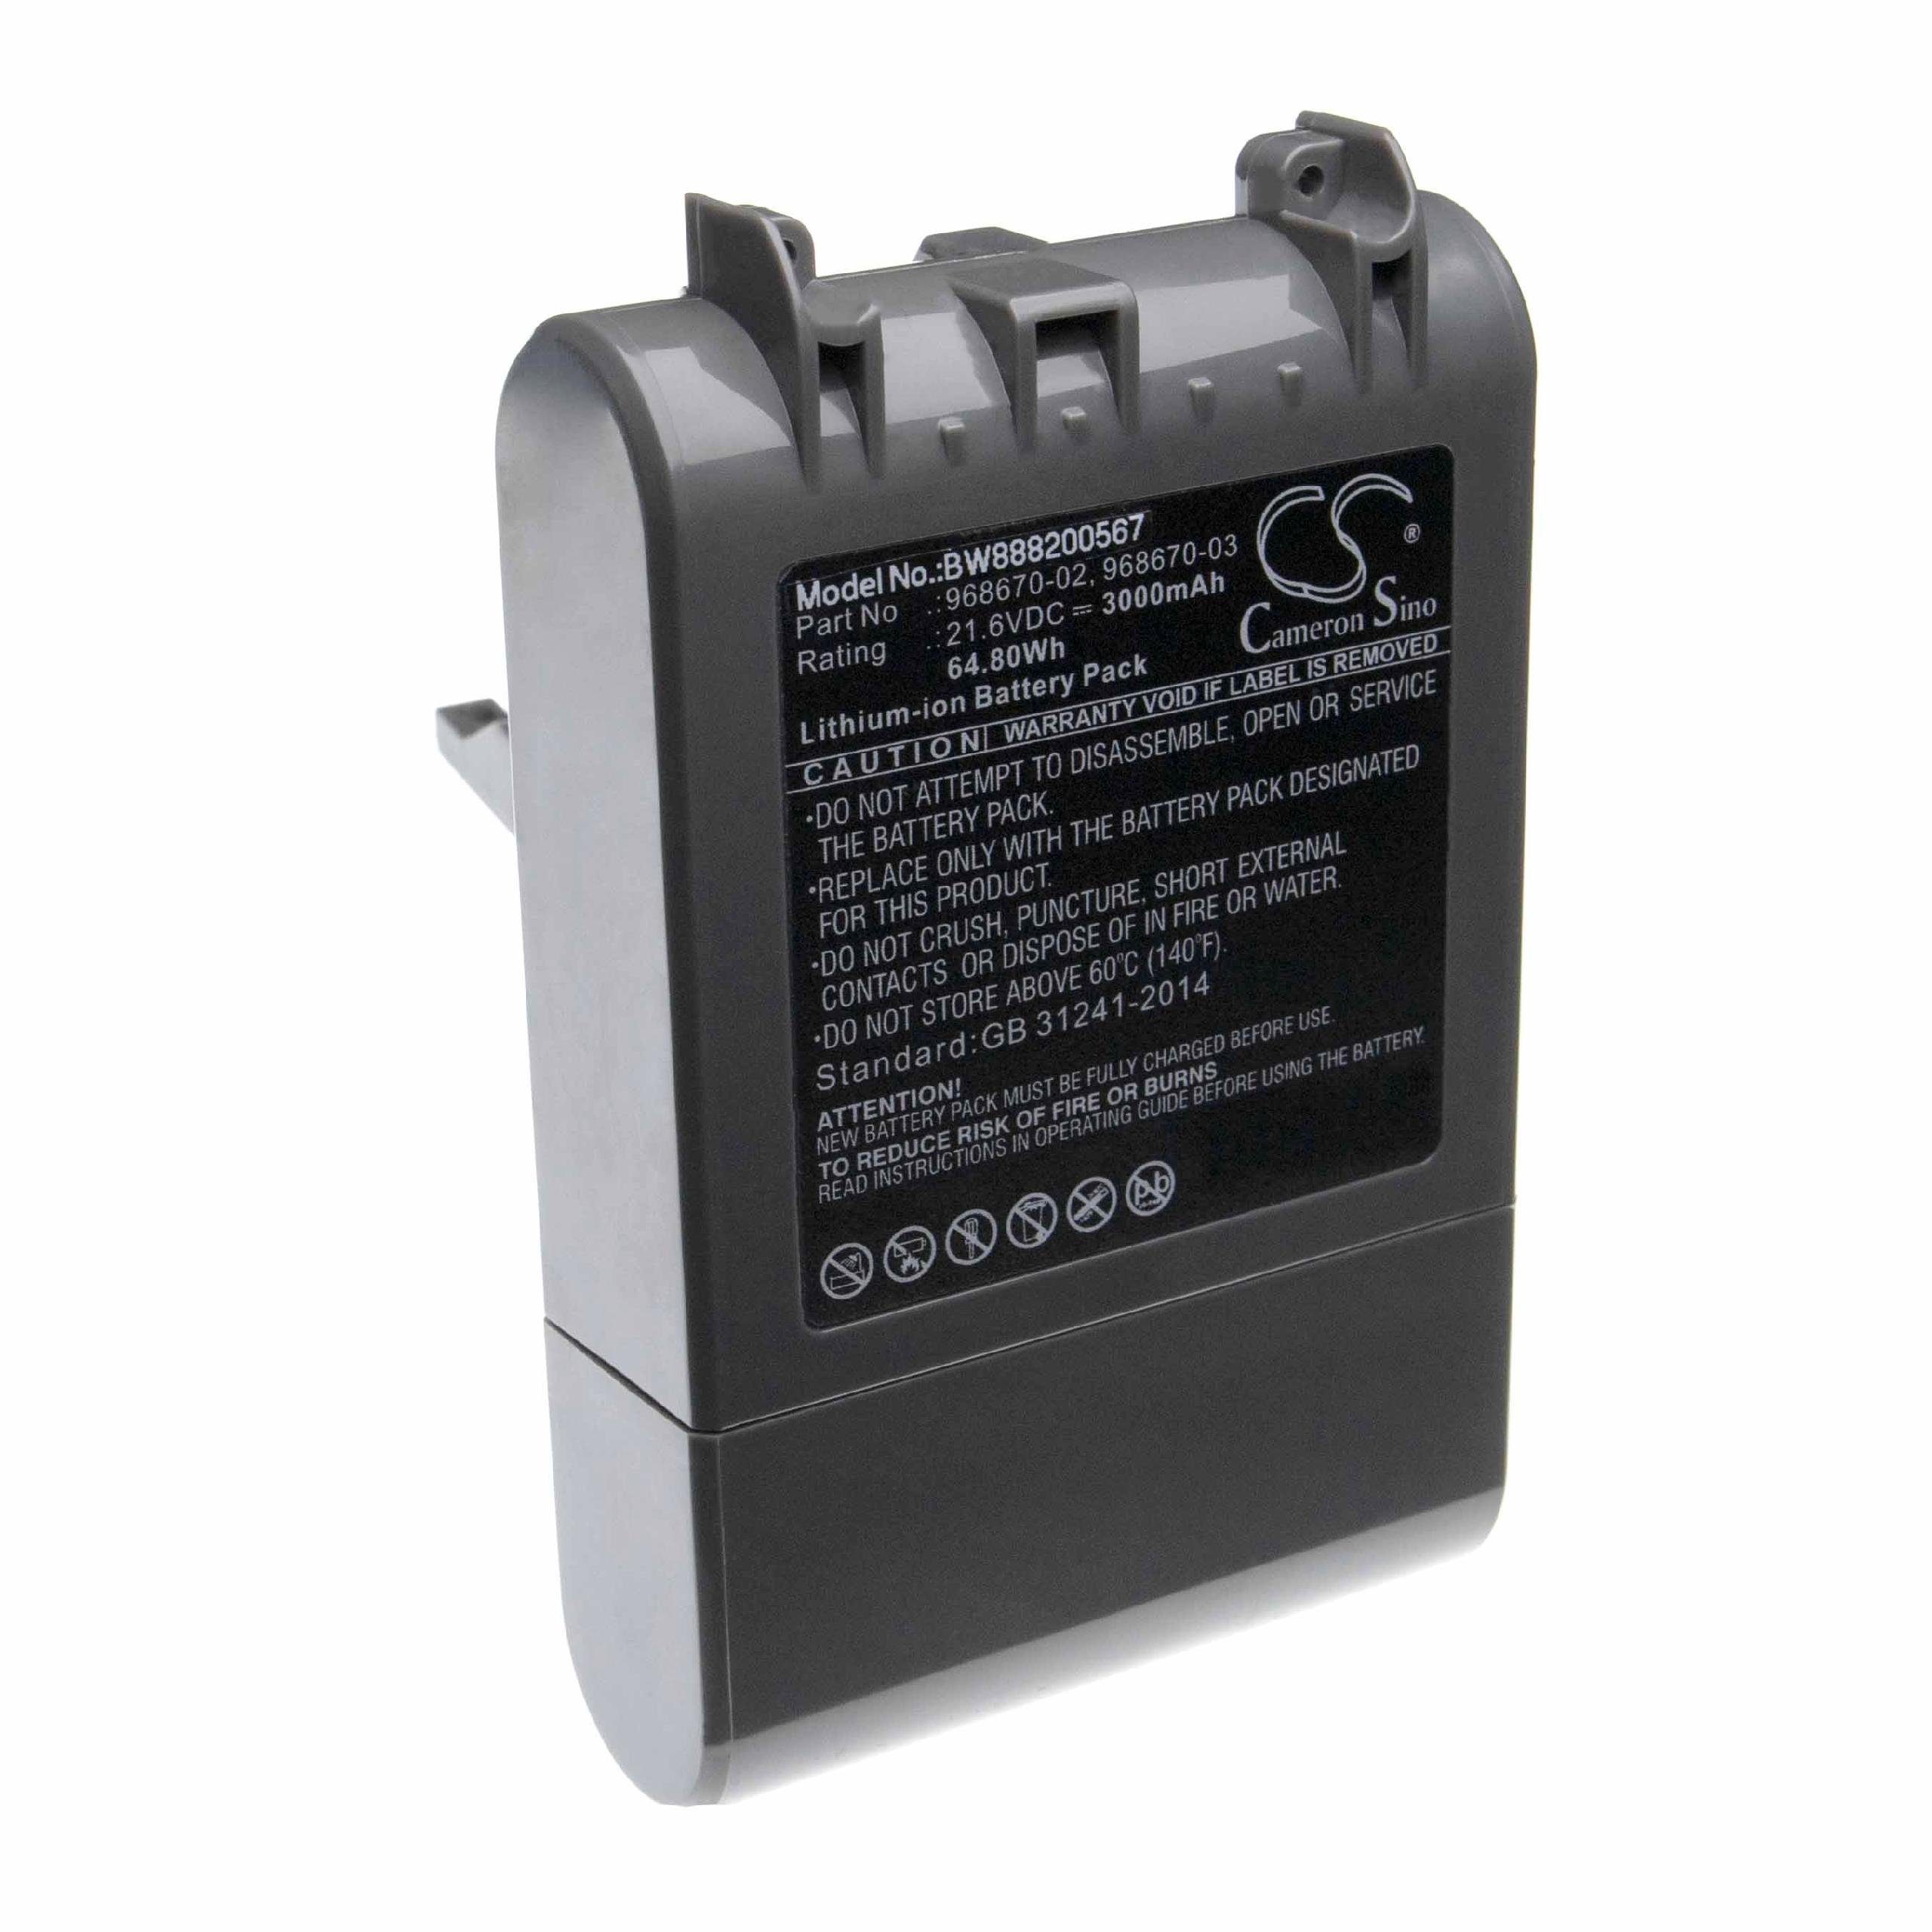 Battery Replacement for Dyson 968670-03, 968670-02 for - 3000mAh, 21.6V, Li-Ion